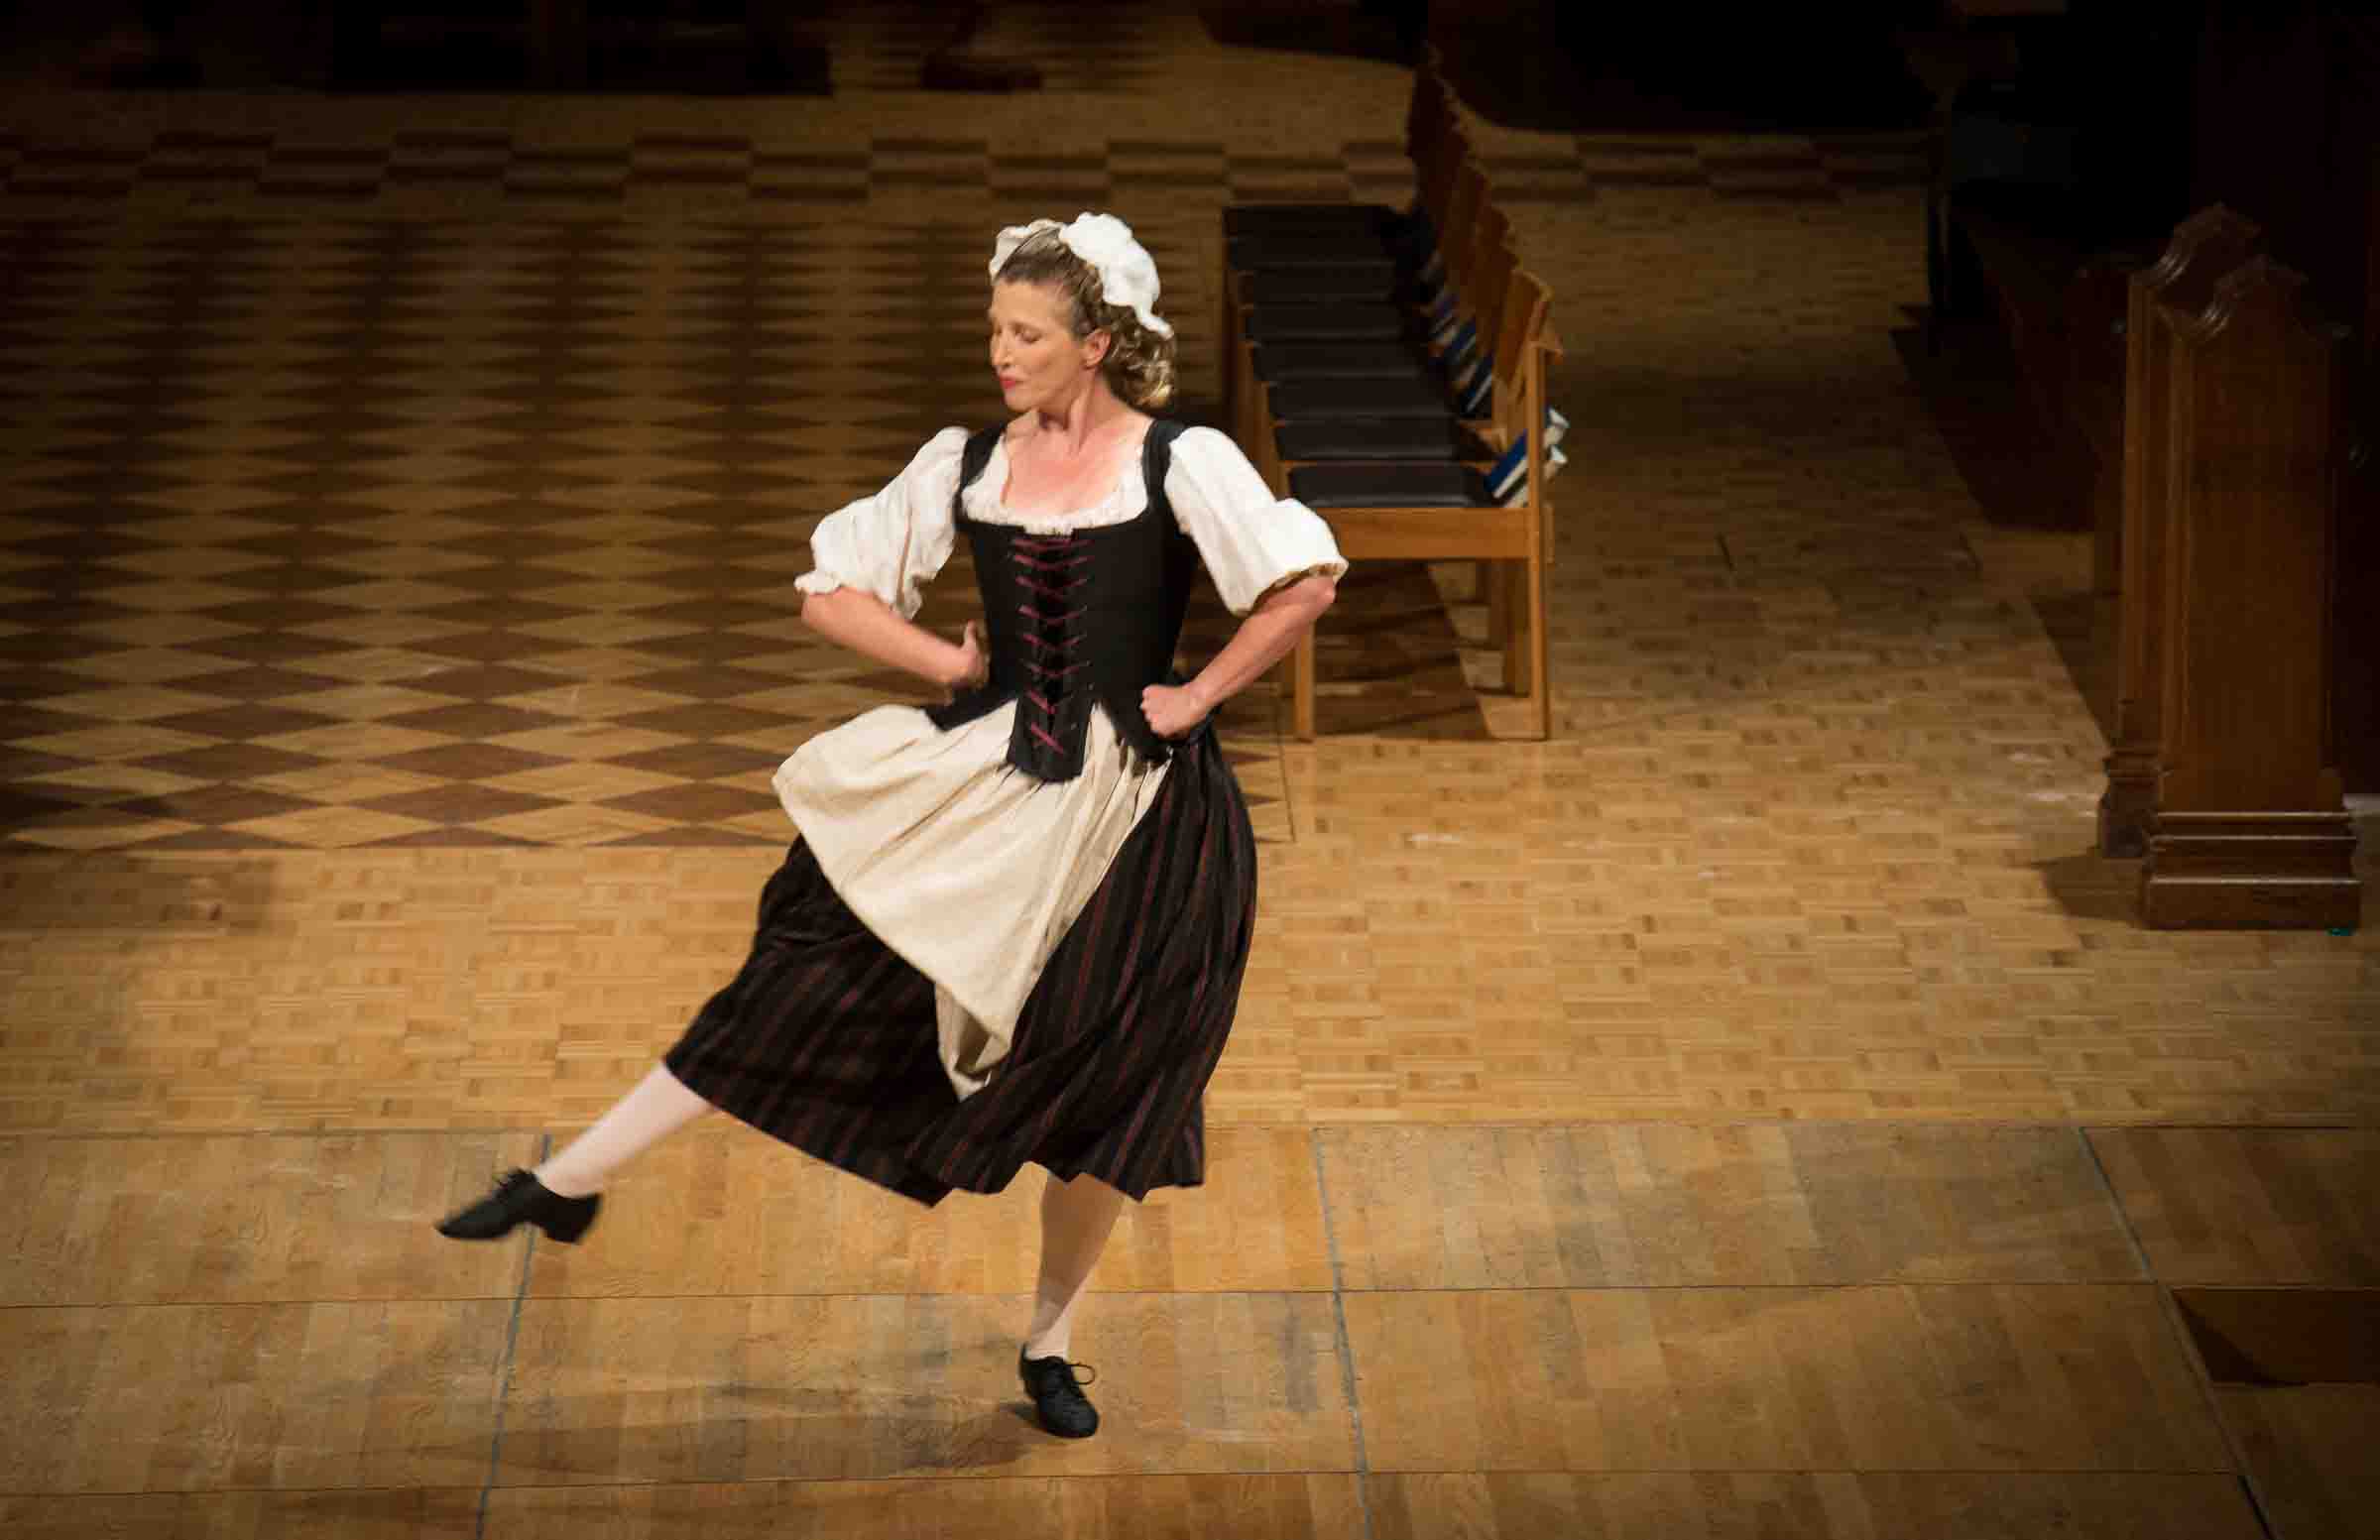 Marie-Nathalie Lacoursière in Anna Magdalena Songbook – Home Suite Home. Photo © Jan Gates